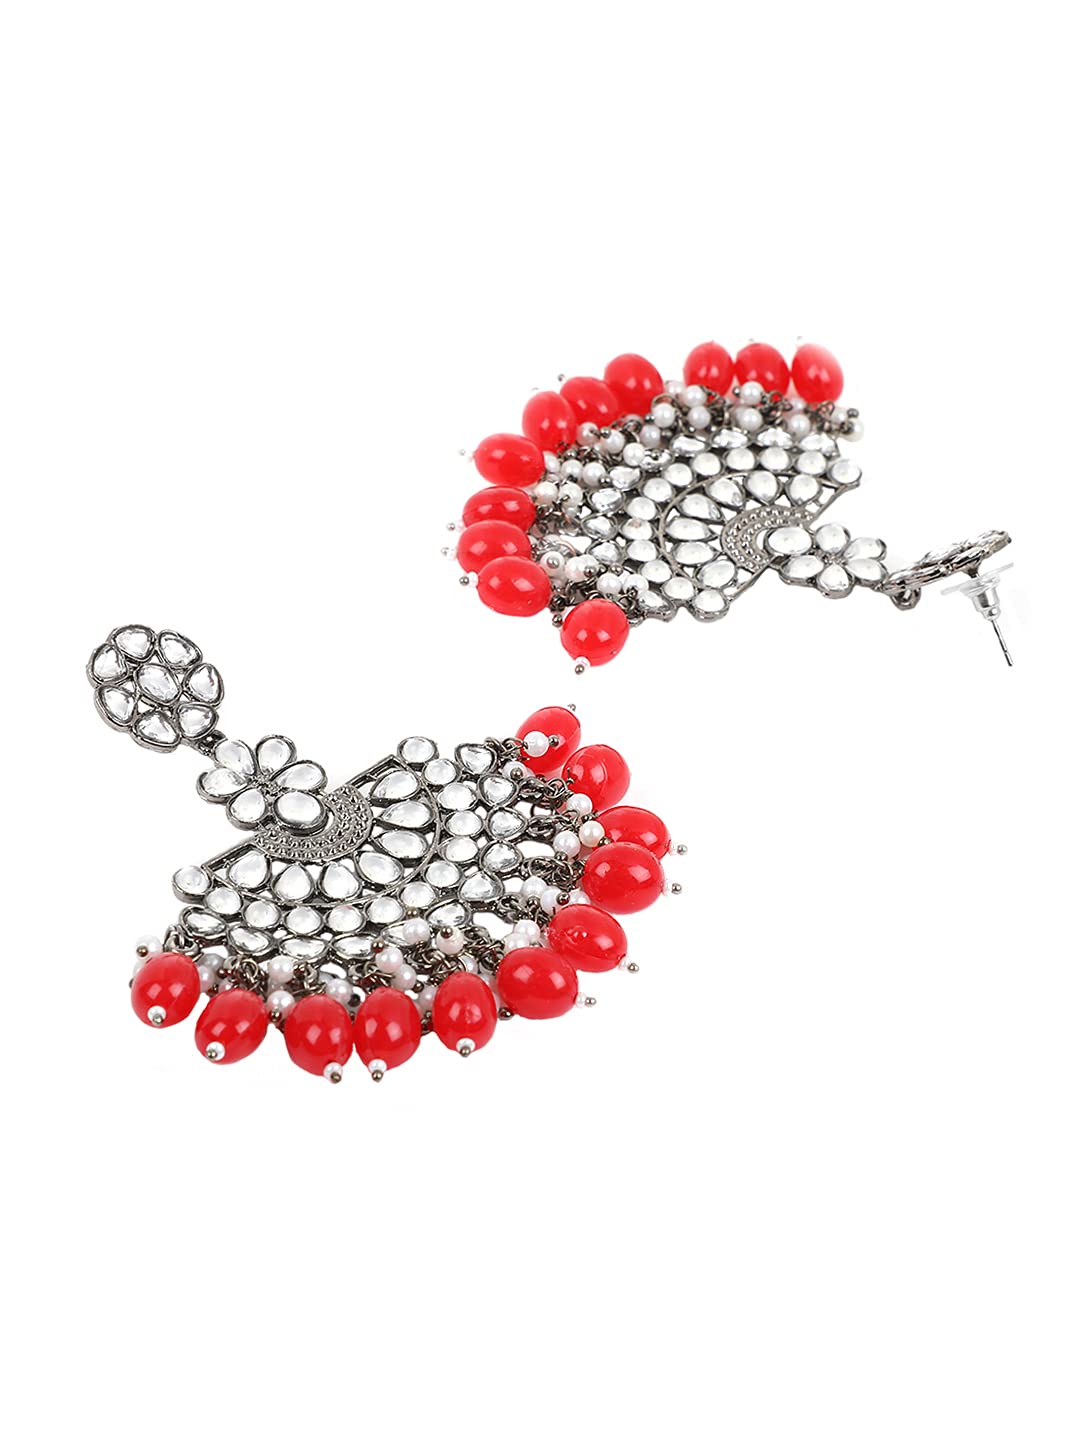 Yellow Chimes Ethnic Silver Oxidised Floral Design Kundan Studded Red Beads Chandbali Earrings for Women and Girls, Silver, Red, Medium (YCTJER-93BLKMTK-RD)